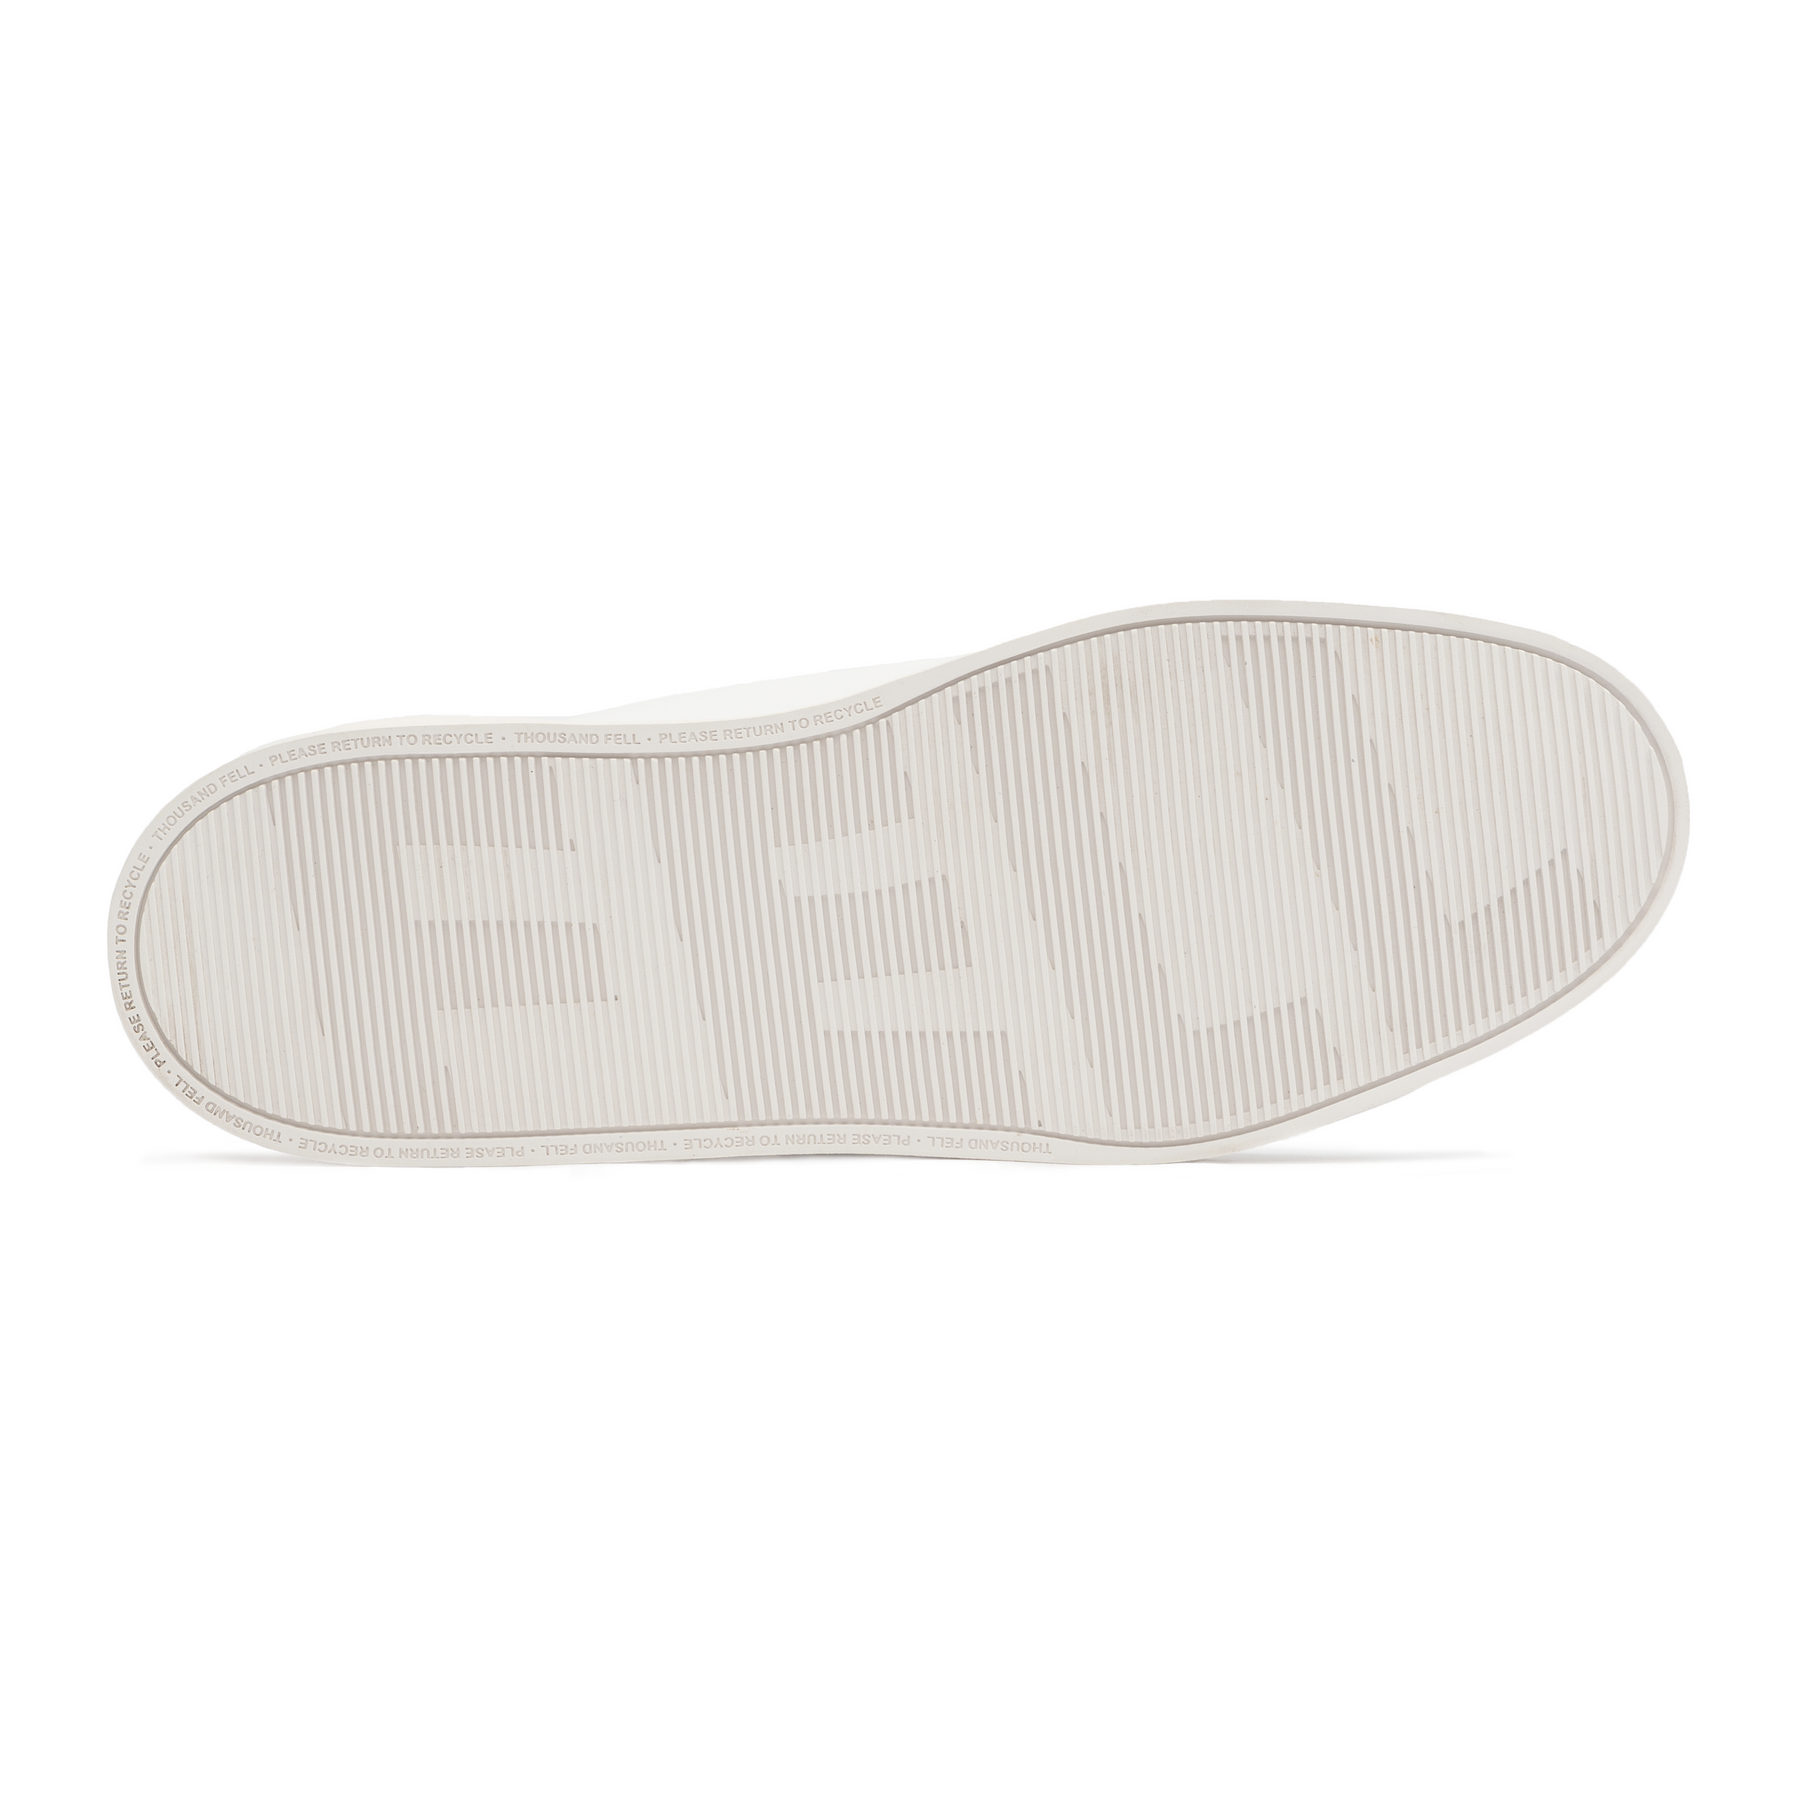 sole view of sustainable sneakers that slip on